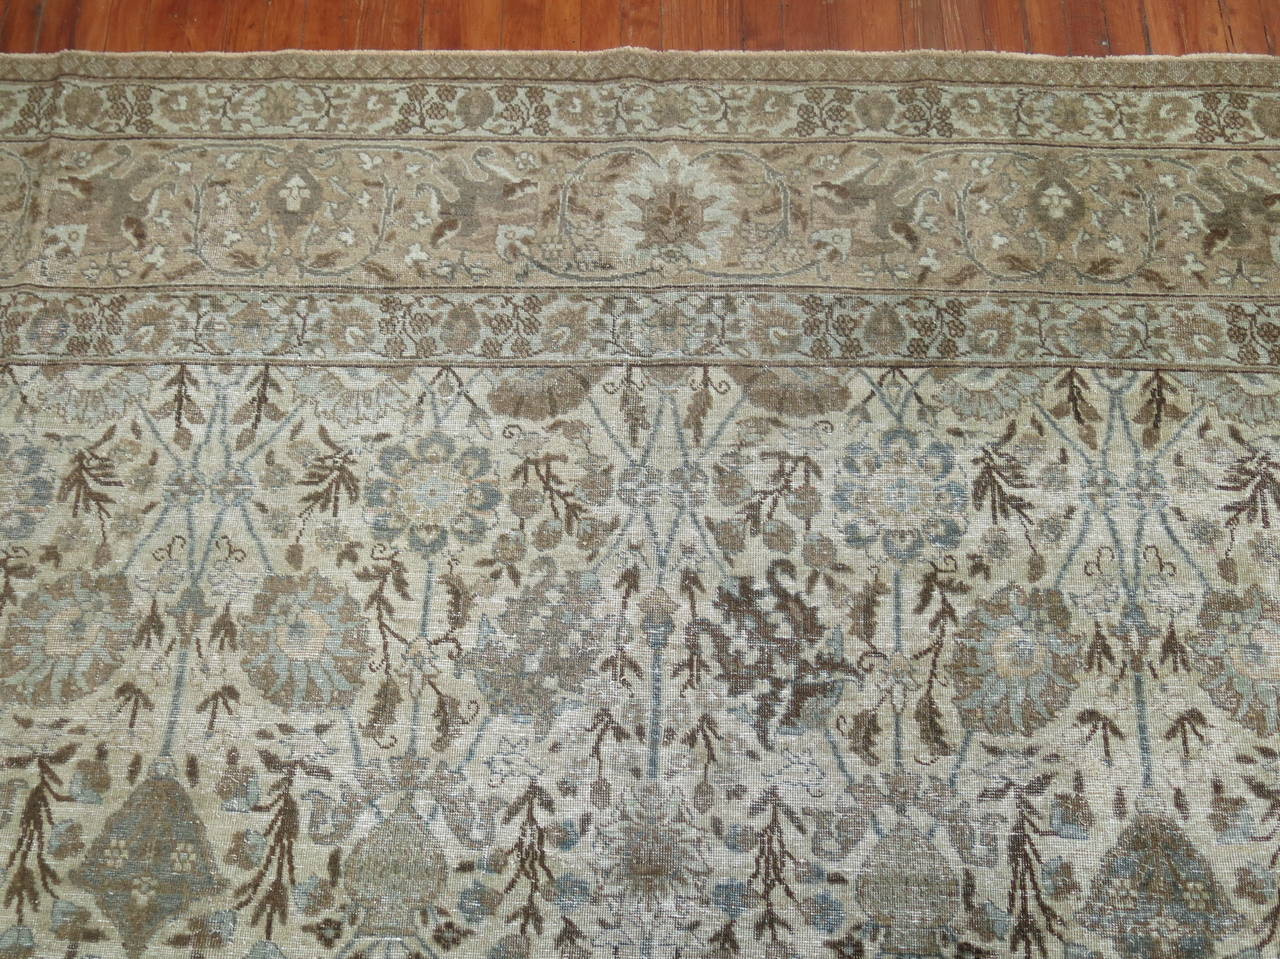 20th Century Neutral Antique Persian Tabriz Rug with Pictorial Animal Border